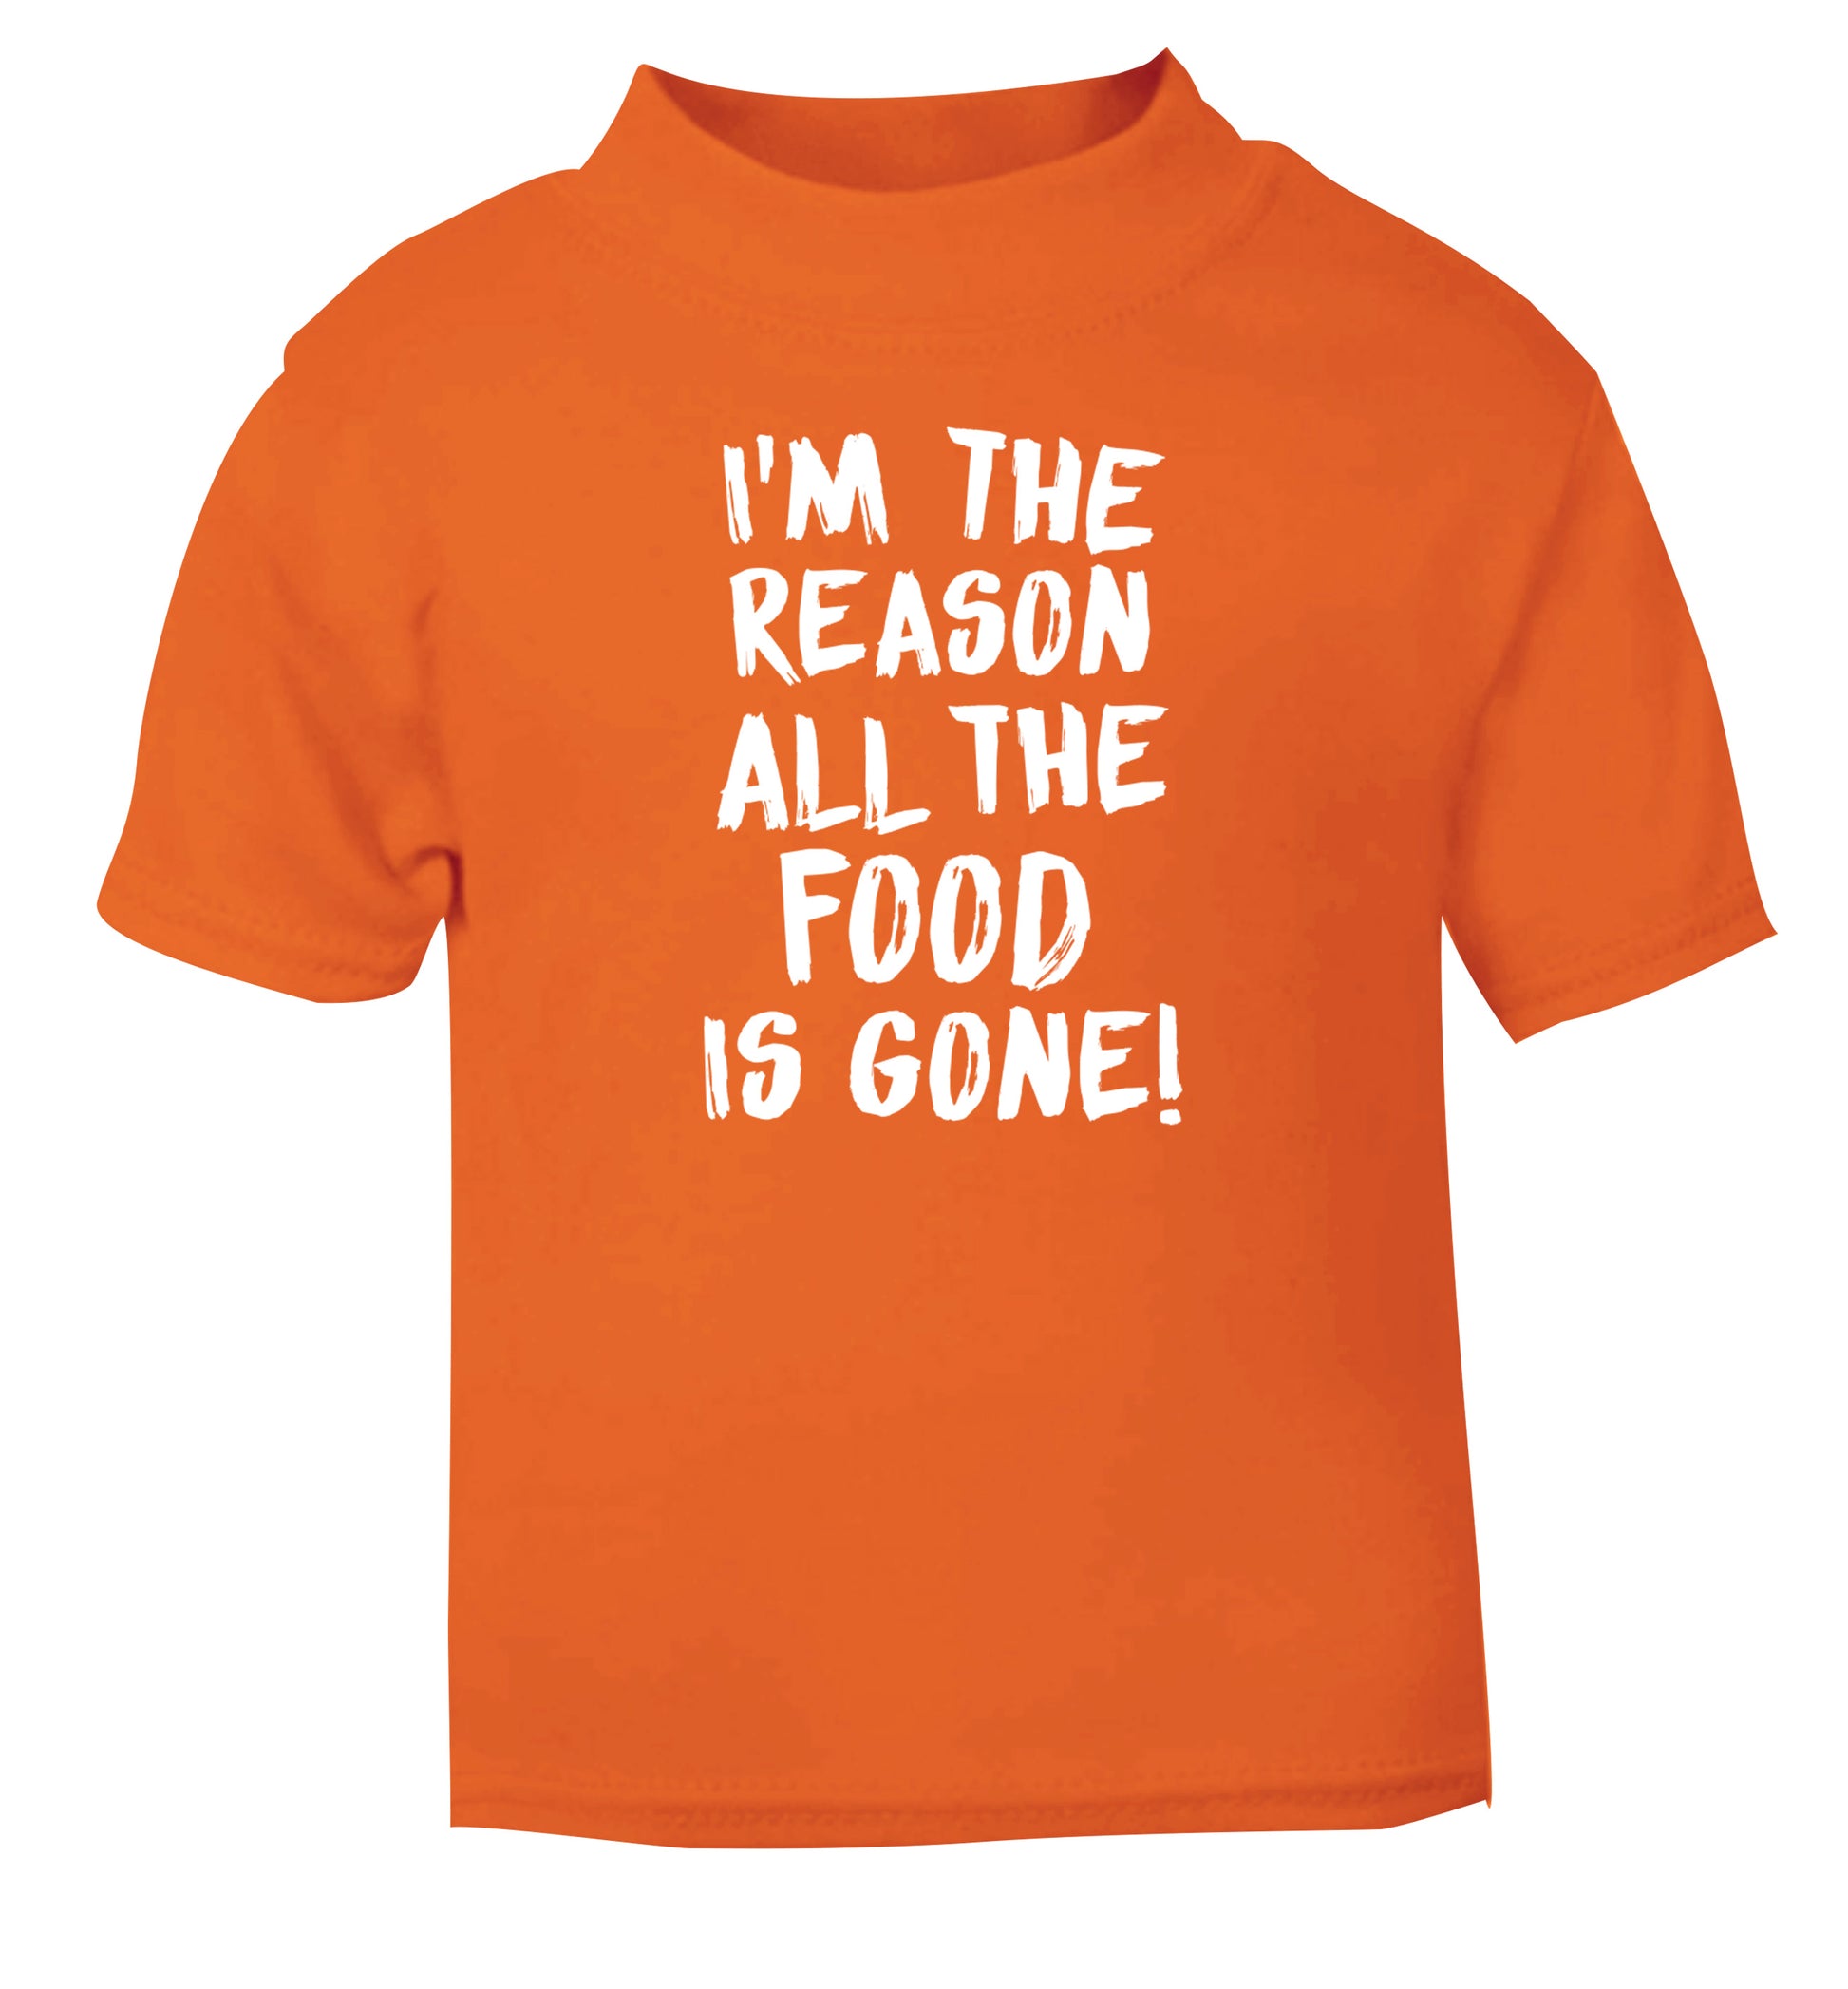 I'm the reason why all the food is gone orange Baby Toddler Tshirt 2 Years